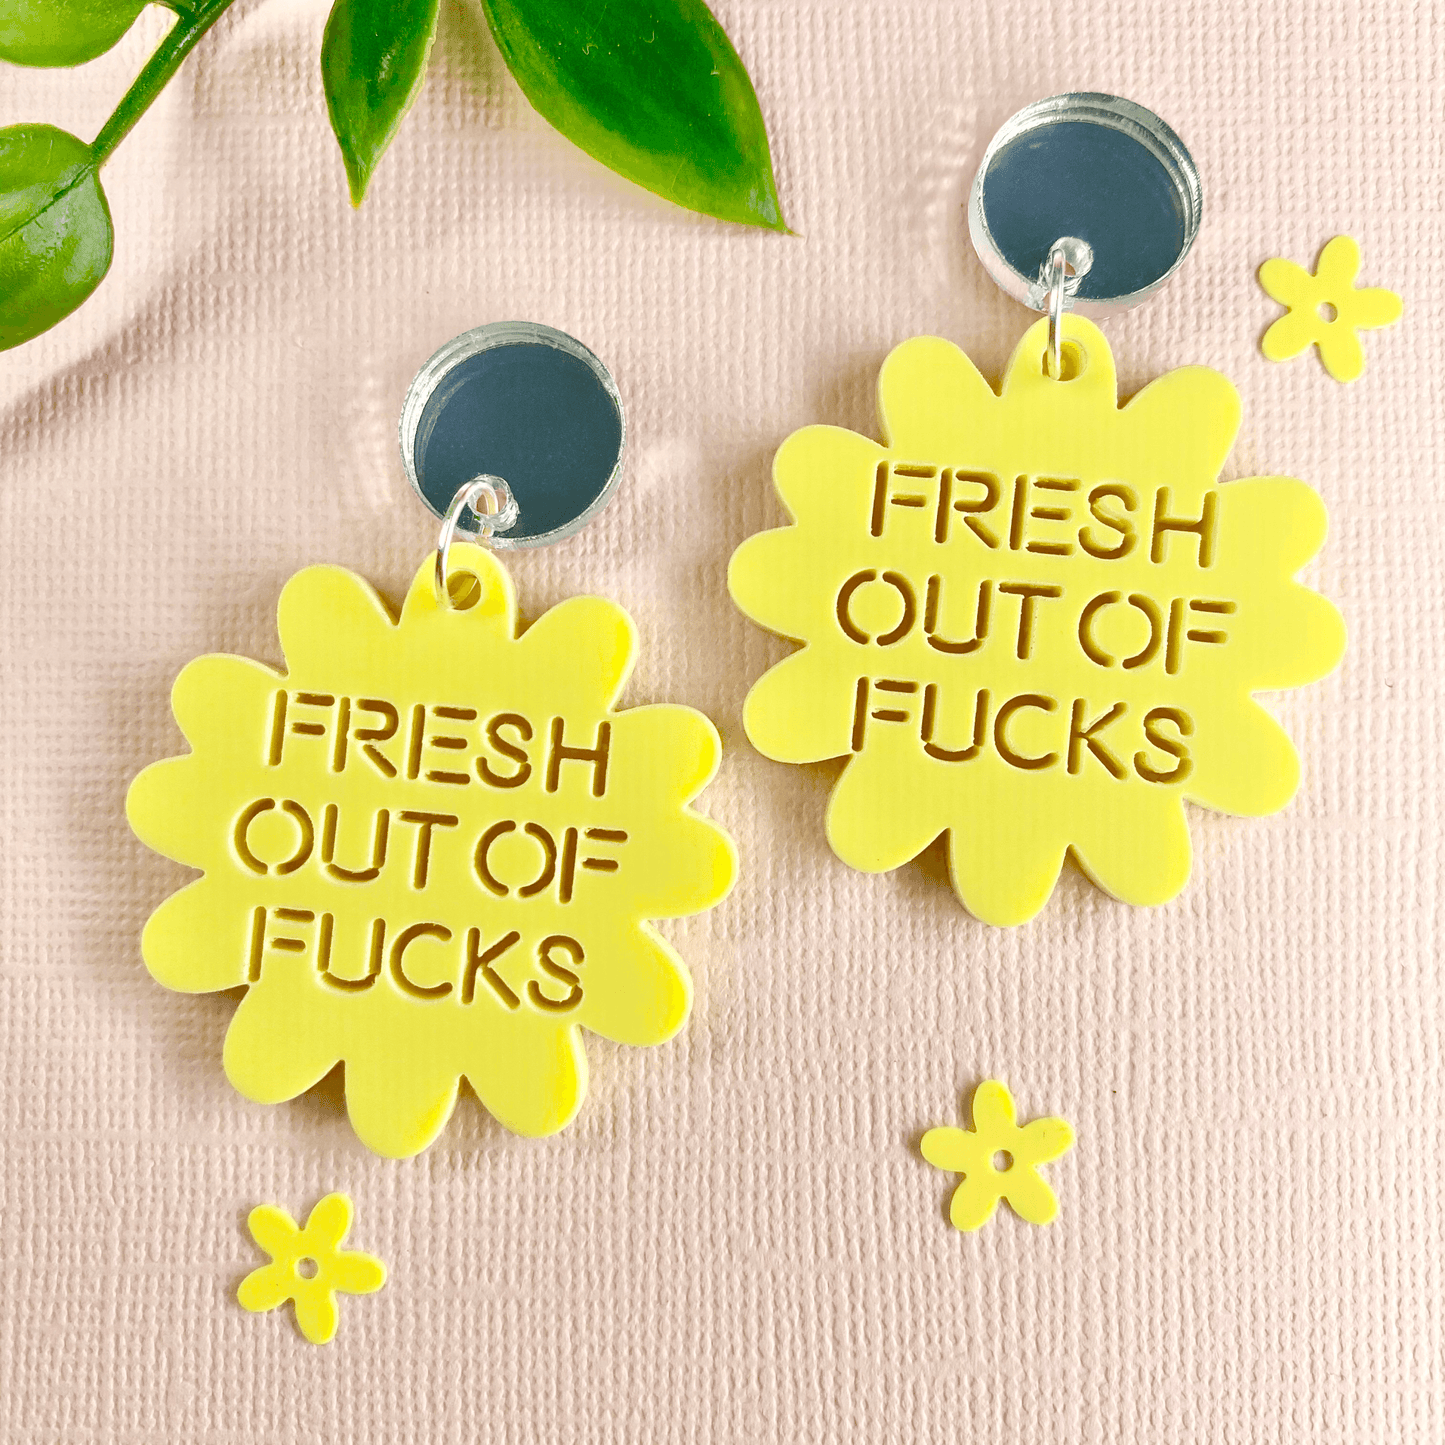 Fresh out Of F-cks Acrylic Earrings (8 colours available) - Marshmallow Moon